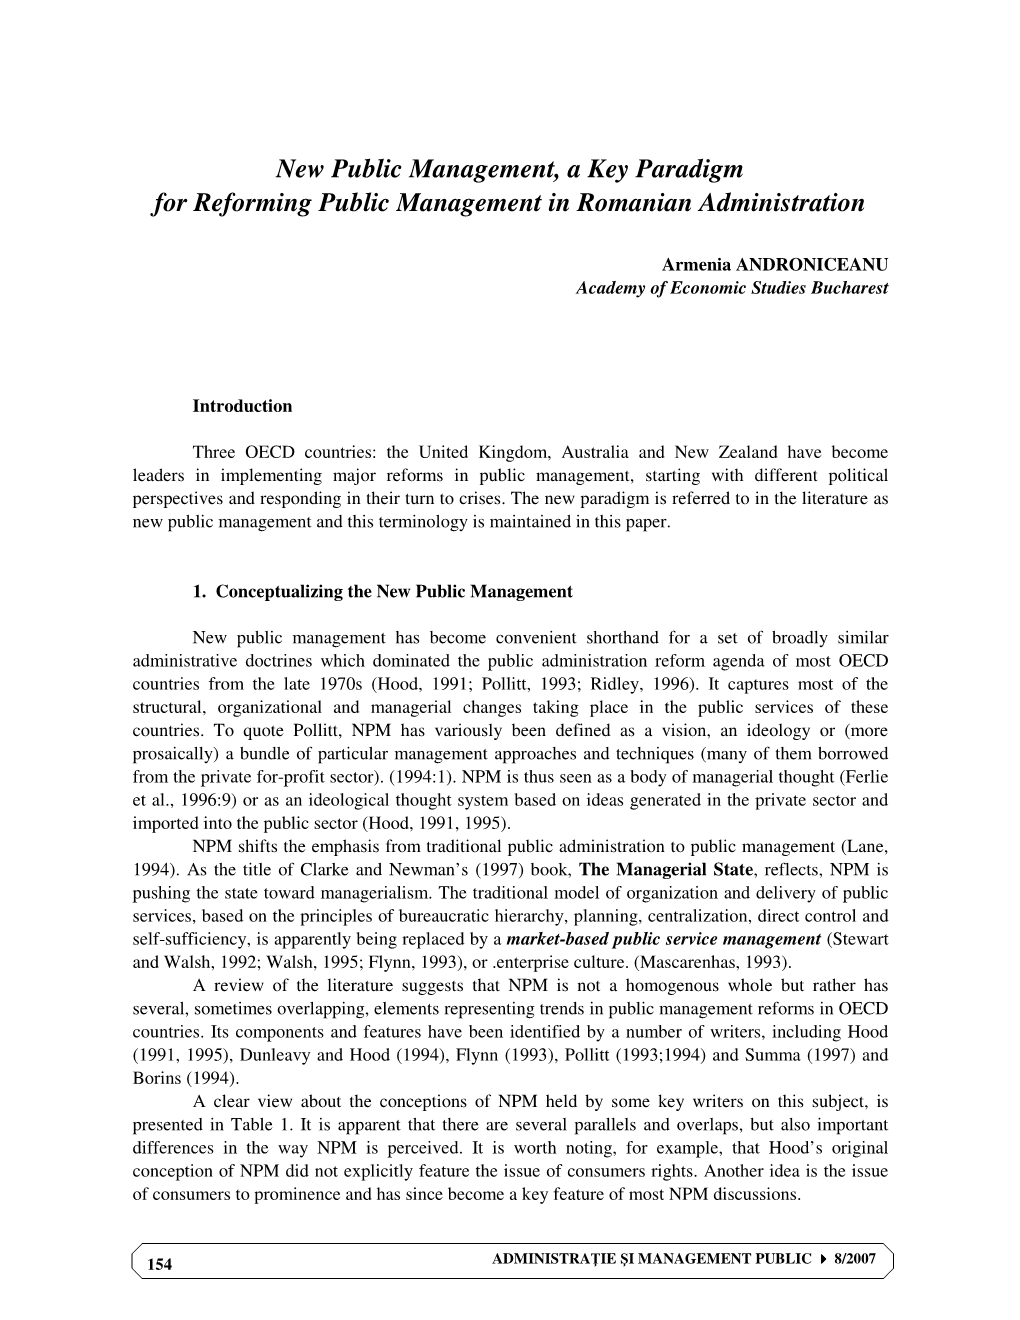 New Public Management, a Key Paradigm for Reforming Public Management in Romanian Administration